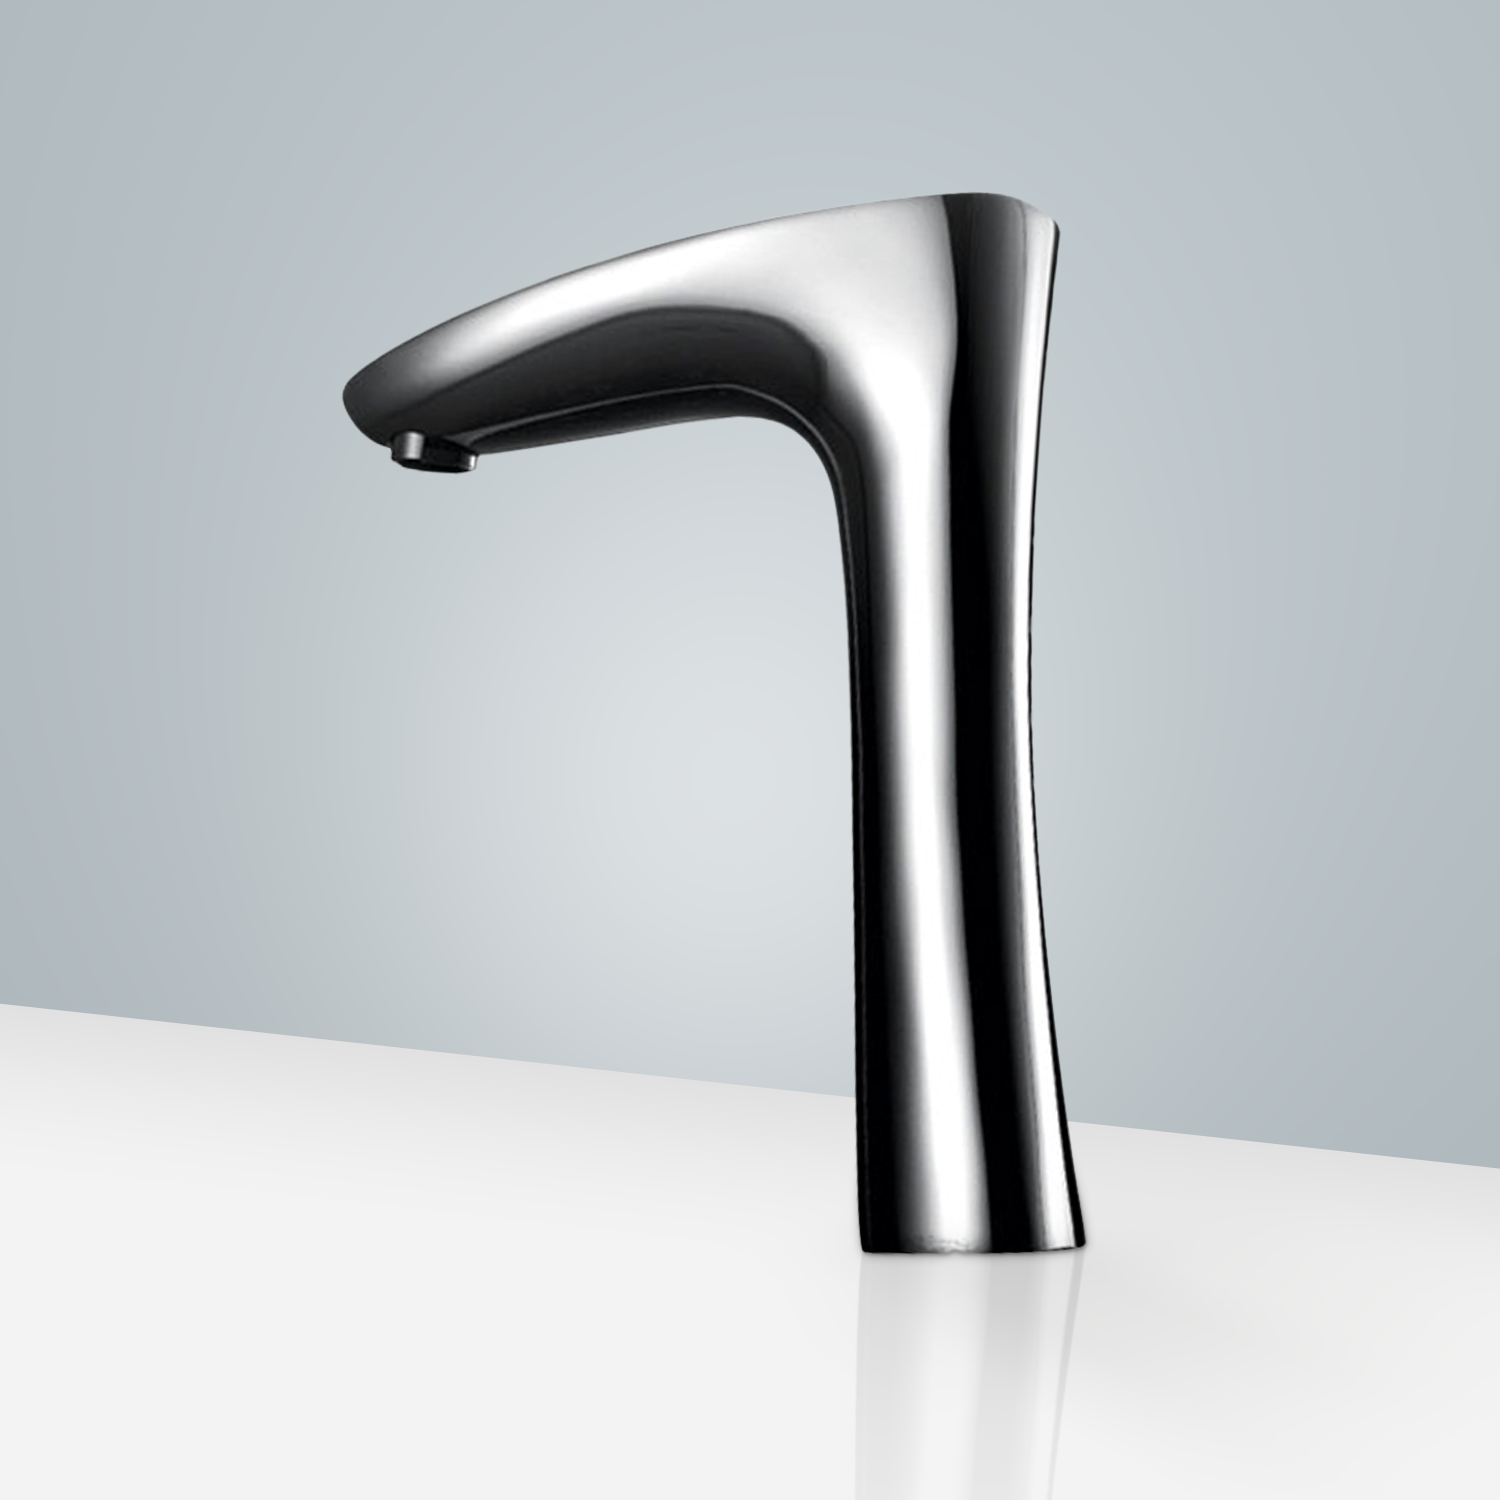 Commercial Automatic Cutting-Edge Intelligent Digital Touch Faucet